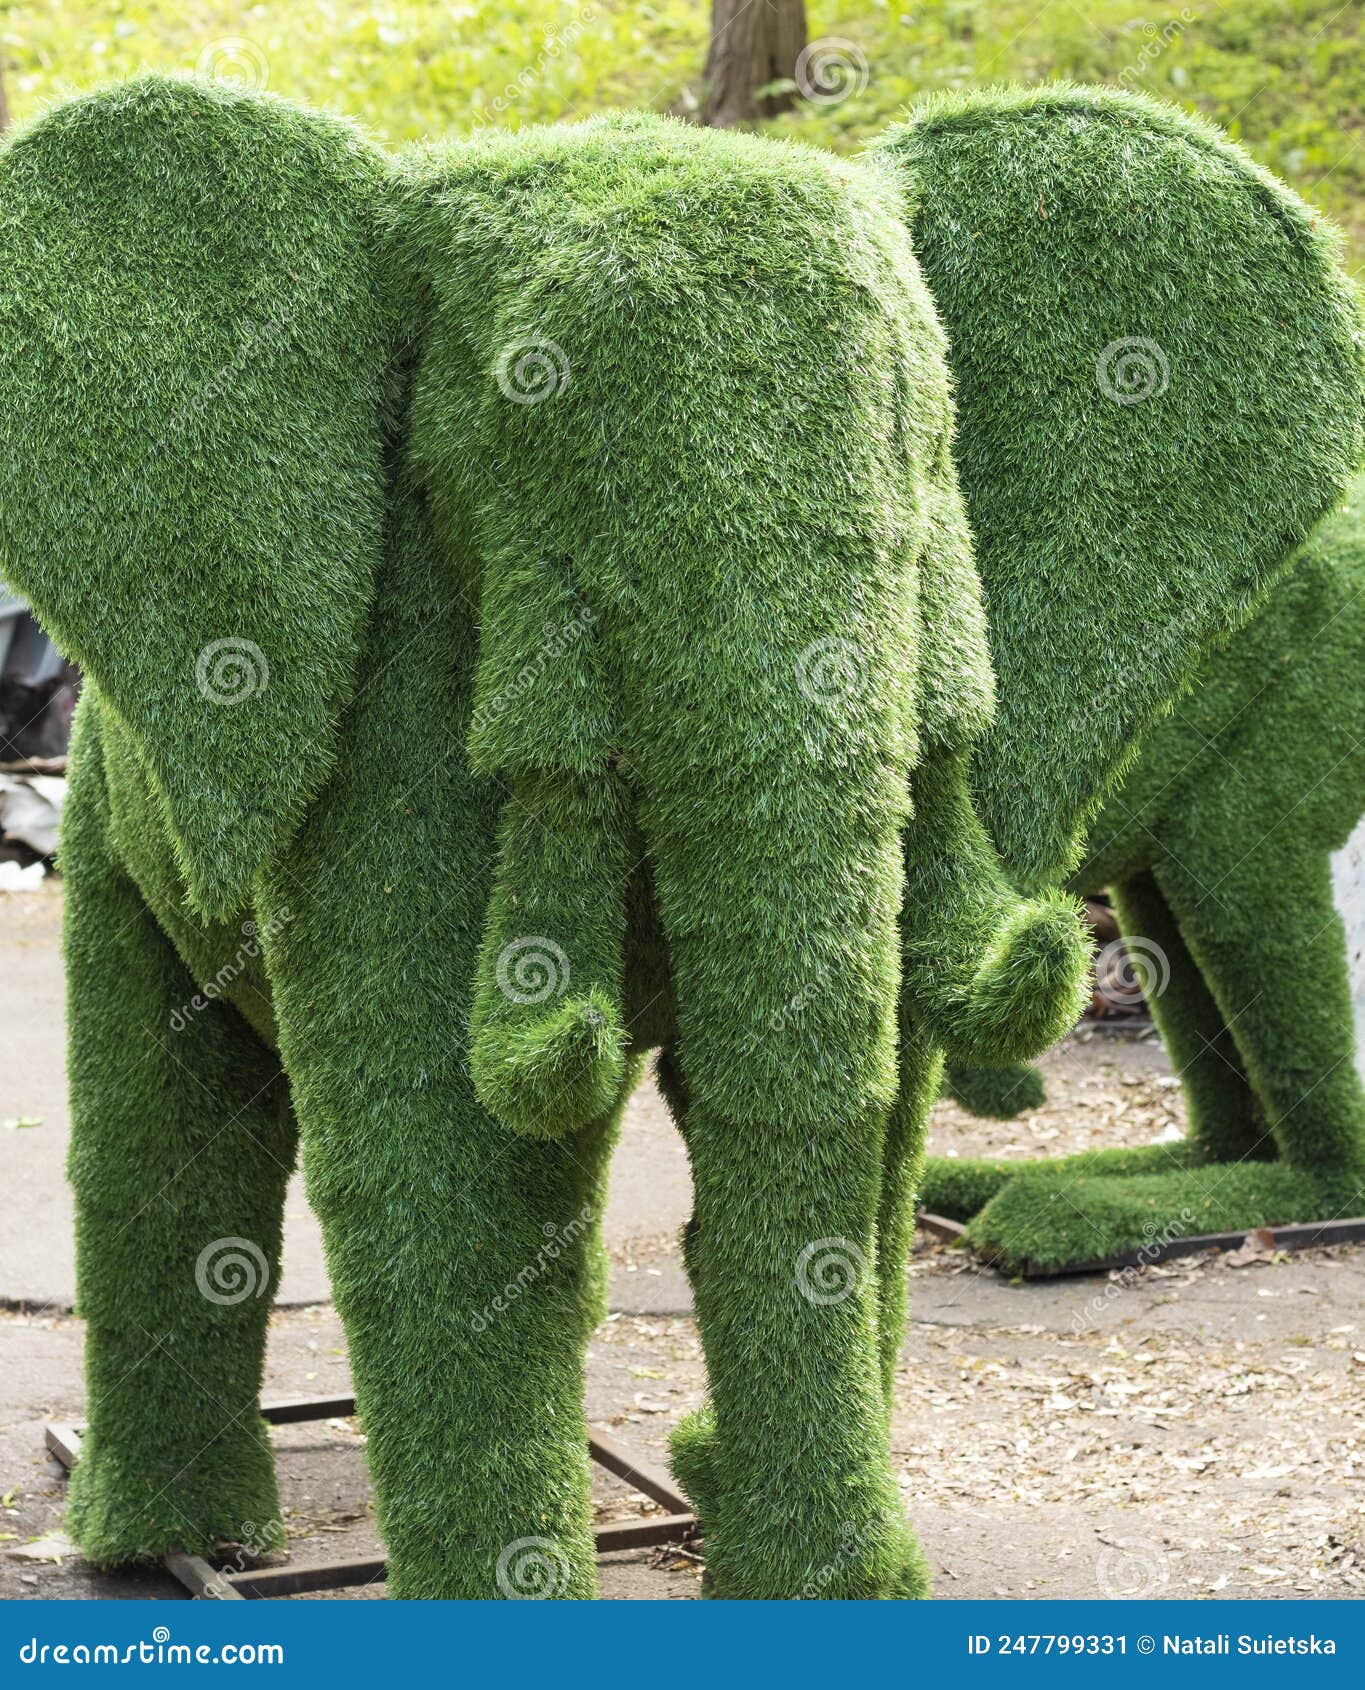 Elephant Created from Bushes at Green Animals. Garden Statues, Sculptures.  Editorial Photo - Image of ecology, decor: 247799331